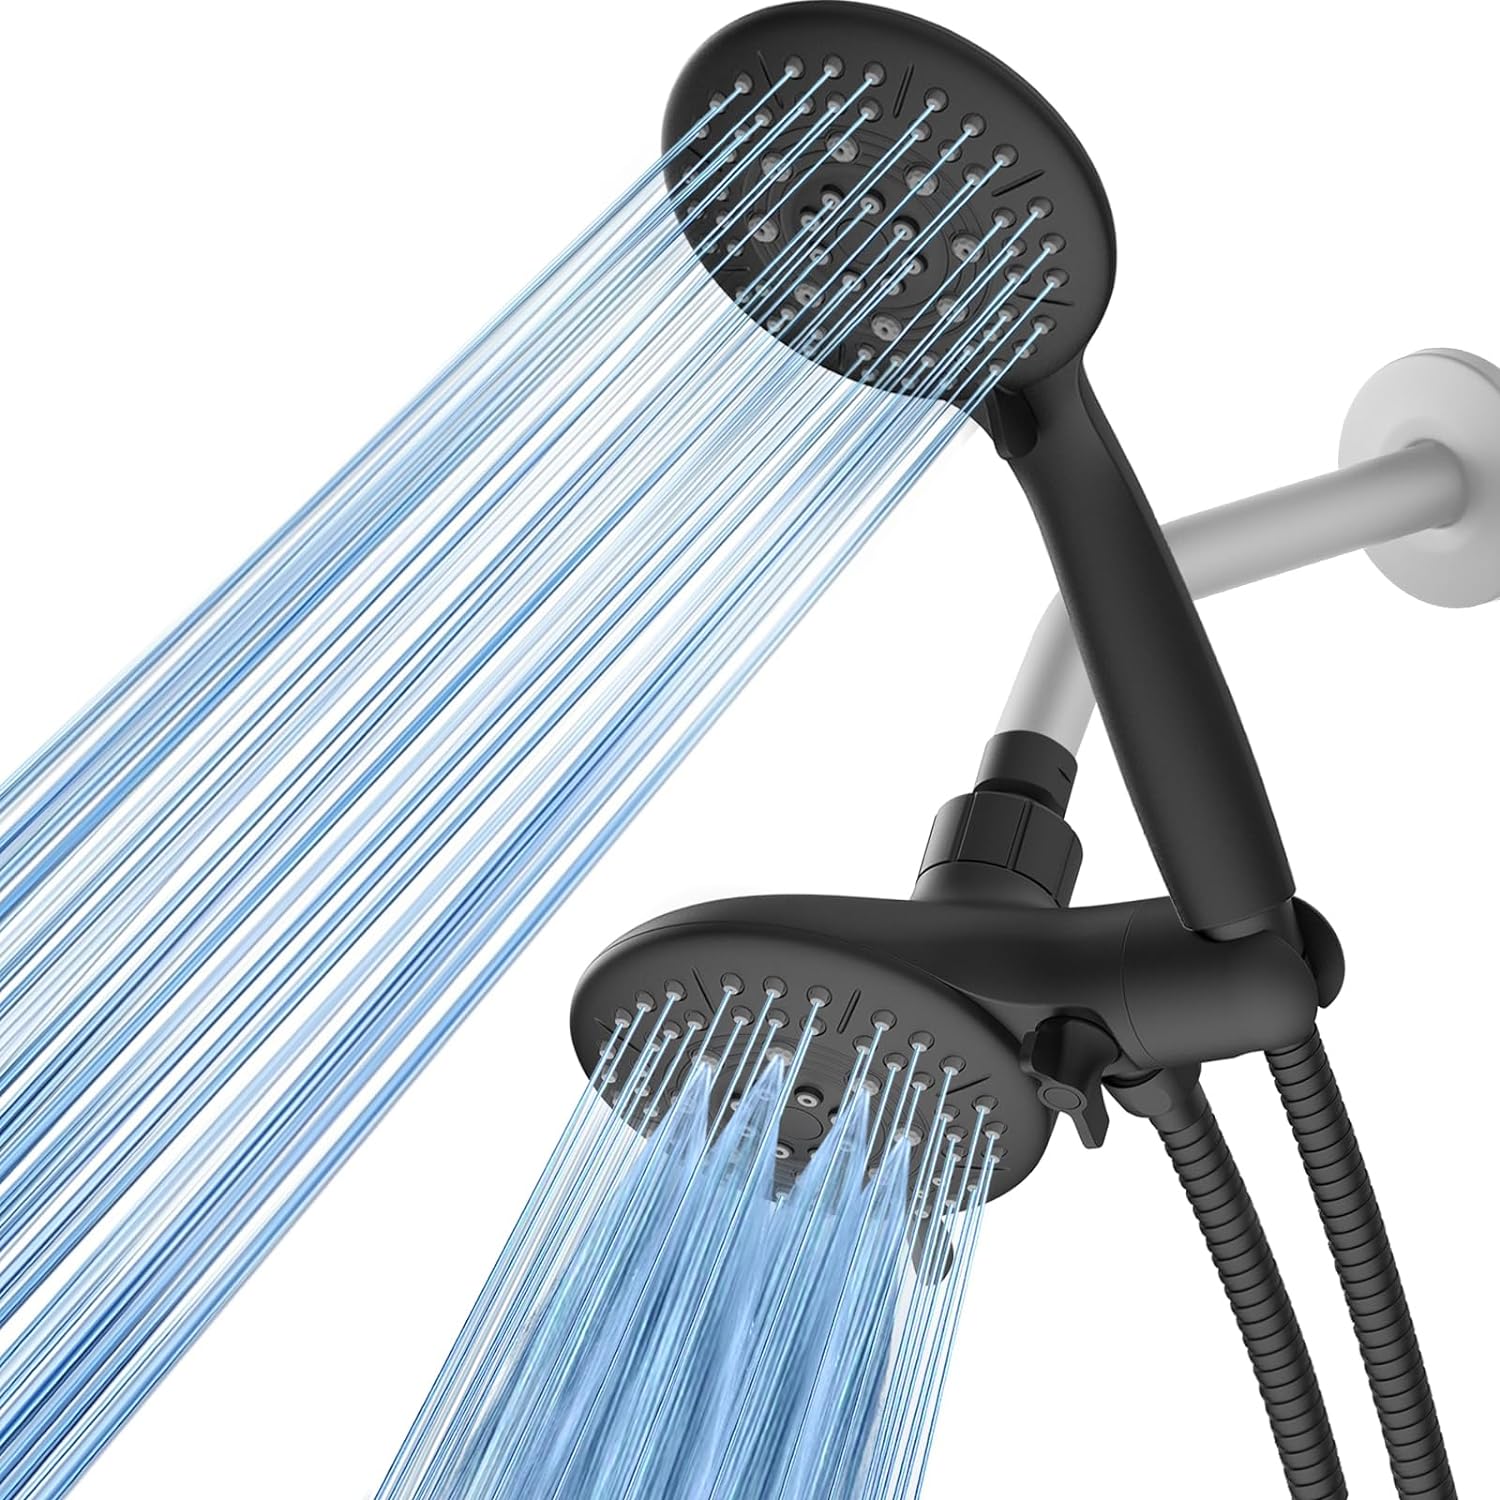 We needed a replacement shower head that had a hose so we could wash our puppies in our new house. I found this and loved how it came with two shower heads, one stationary and the other on the hose, which are the same design and function on both. It was easy to install and looks great in the shower. I love the different settings especially the mist which feels like a spa-like experience. The water pressure feels pretty good. I loved it some much I ever ordered a few more for family members for t